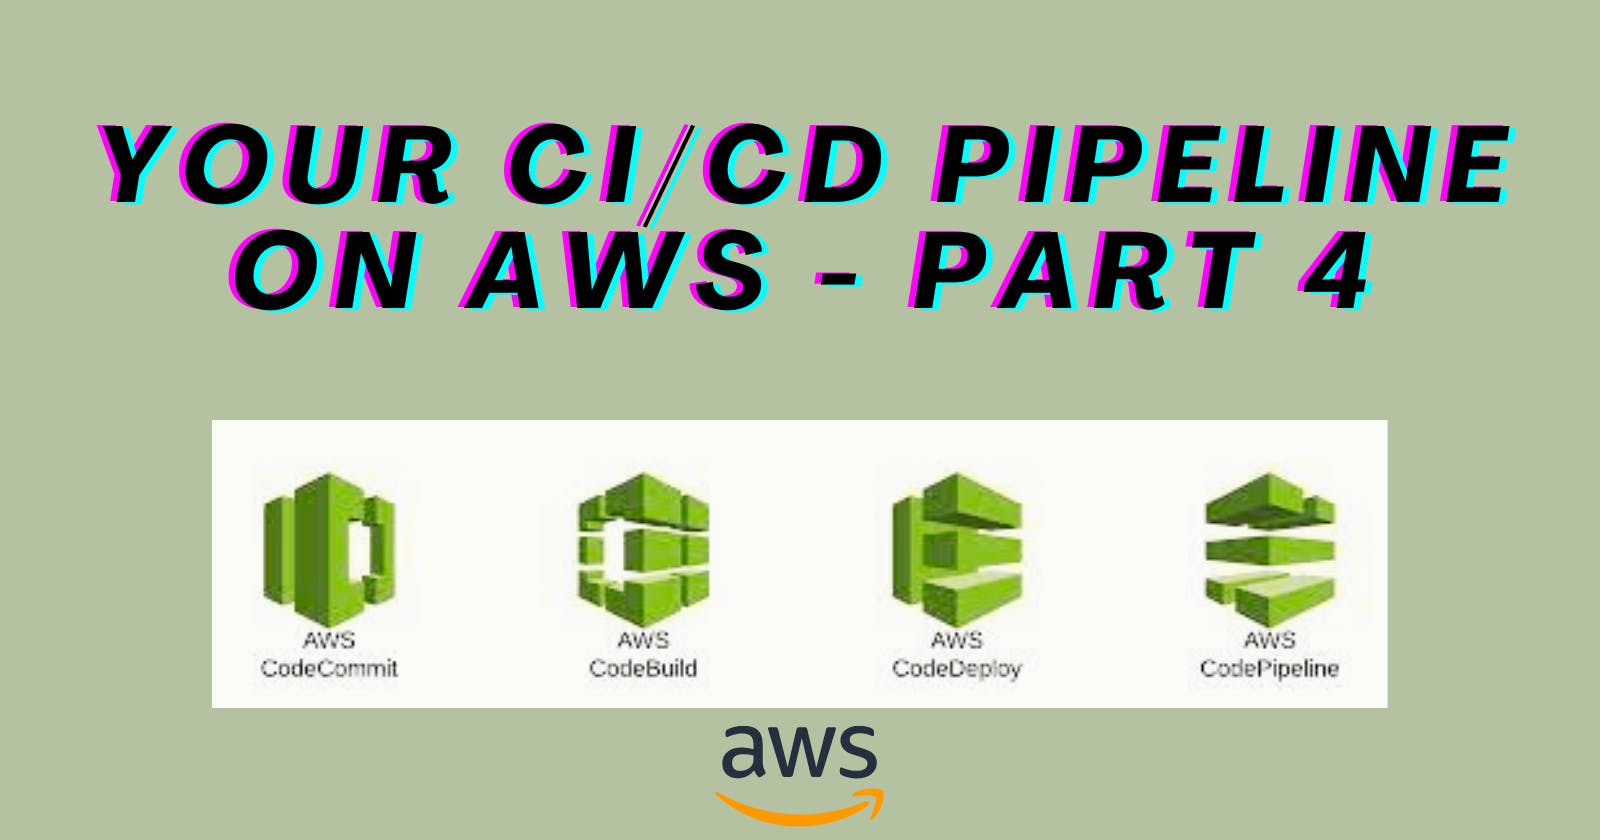 Your CI/CD pipeline on AWS - Part 4